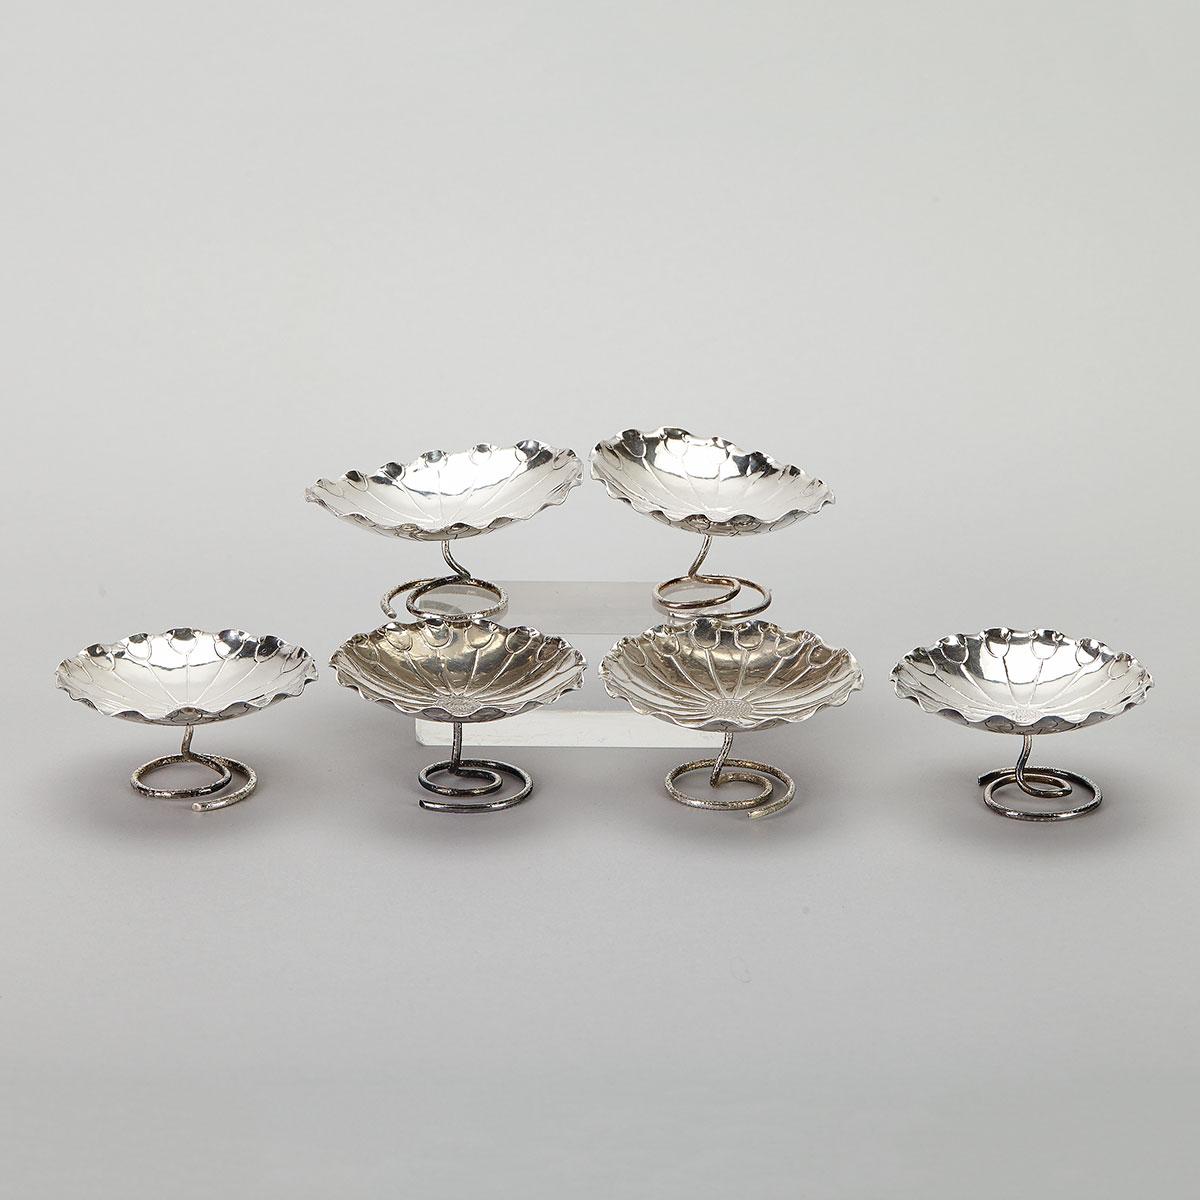 Six Chinese Export Silver Lily Pad Sweet Dishes, c.1900